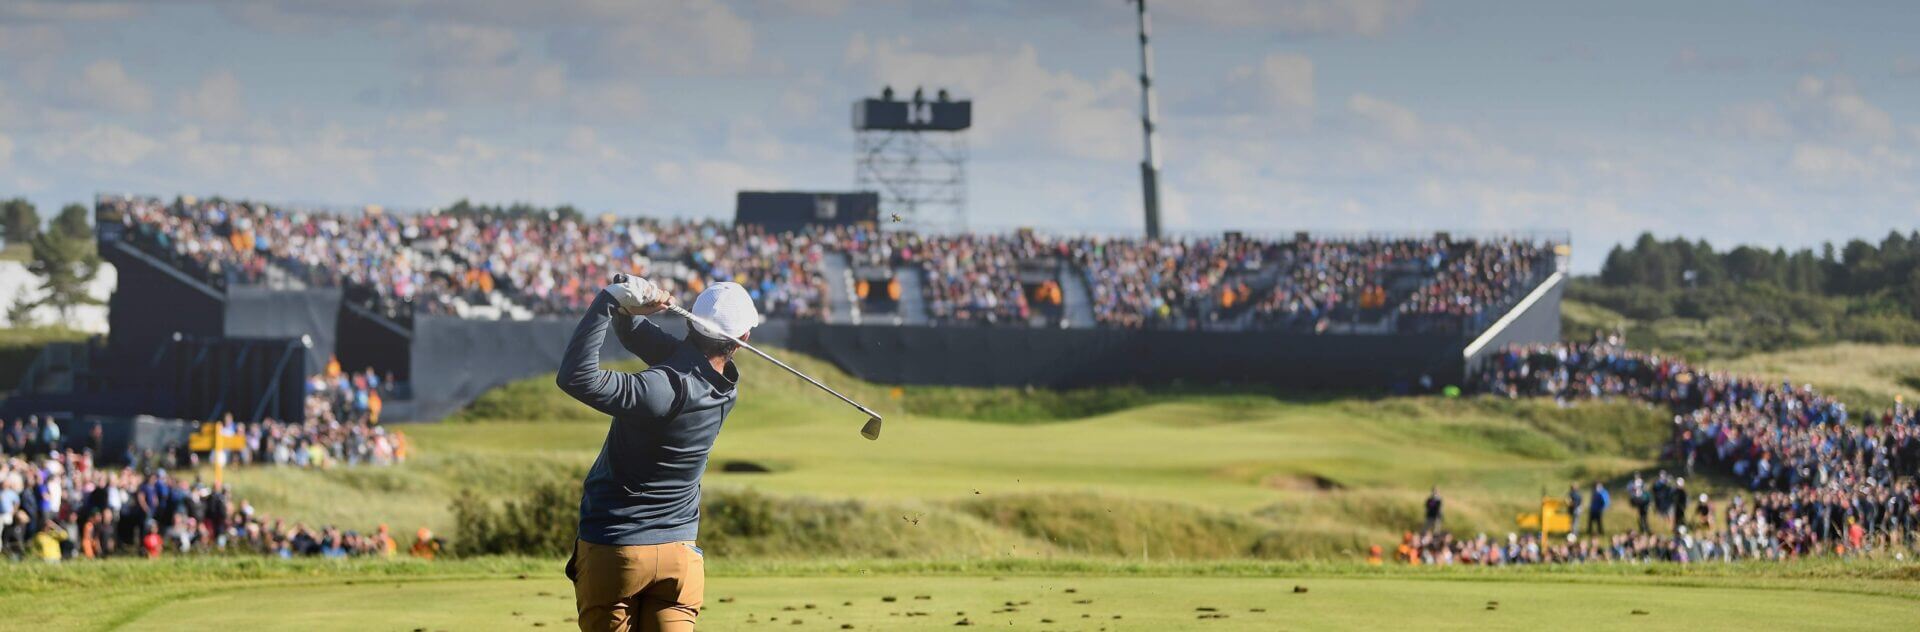 Rory McIlroy hitting a tee shot at the Open Championship